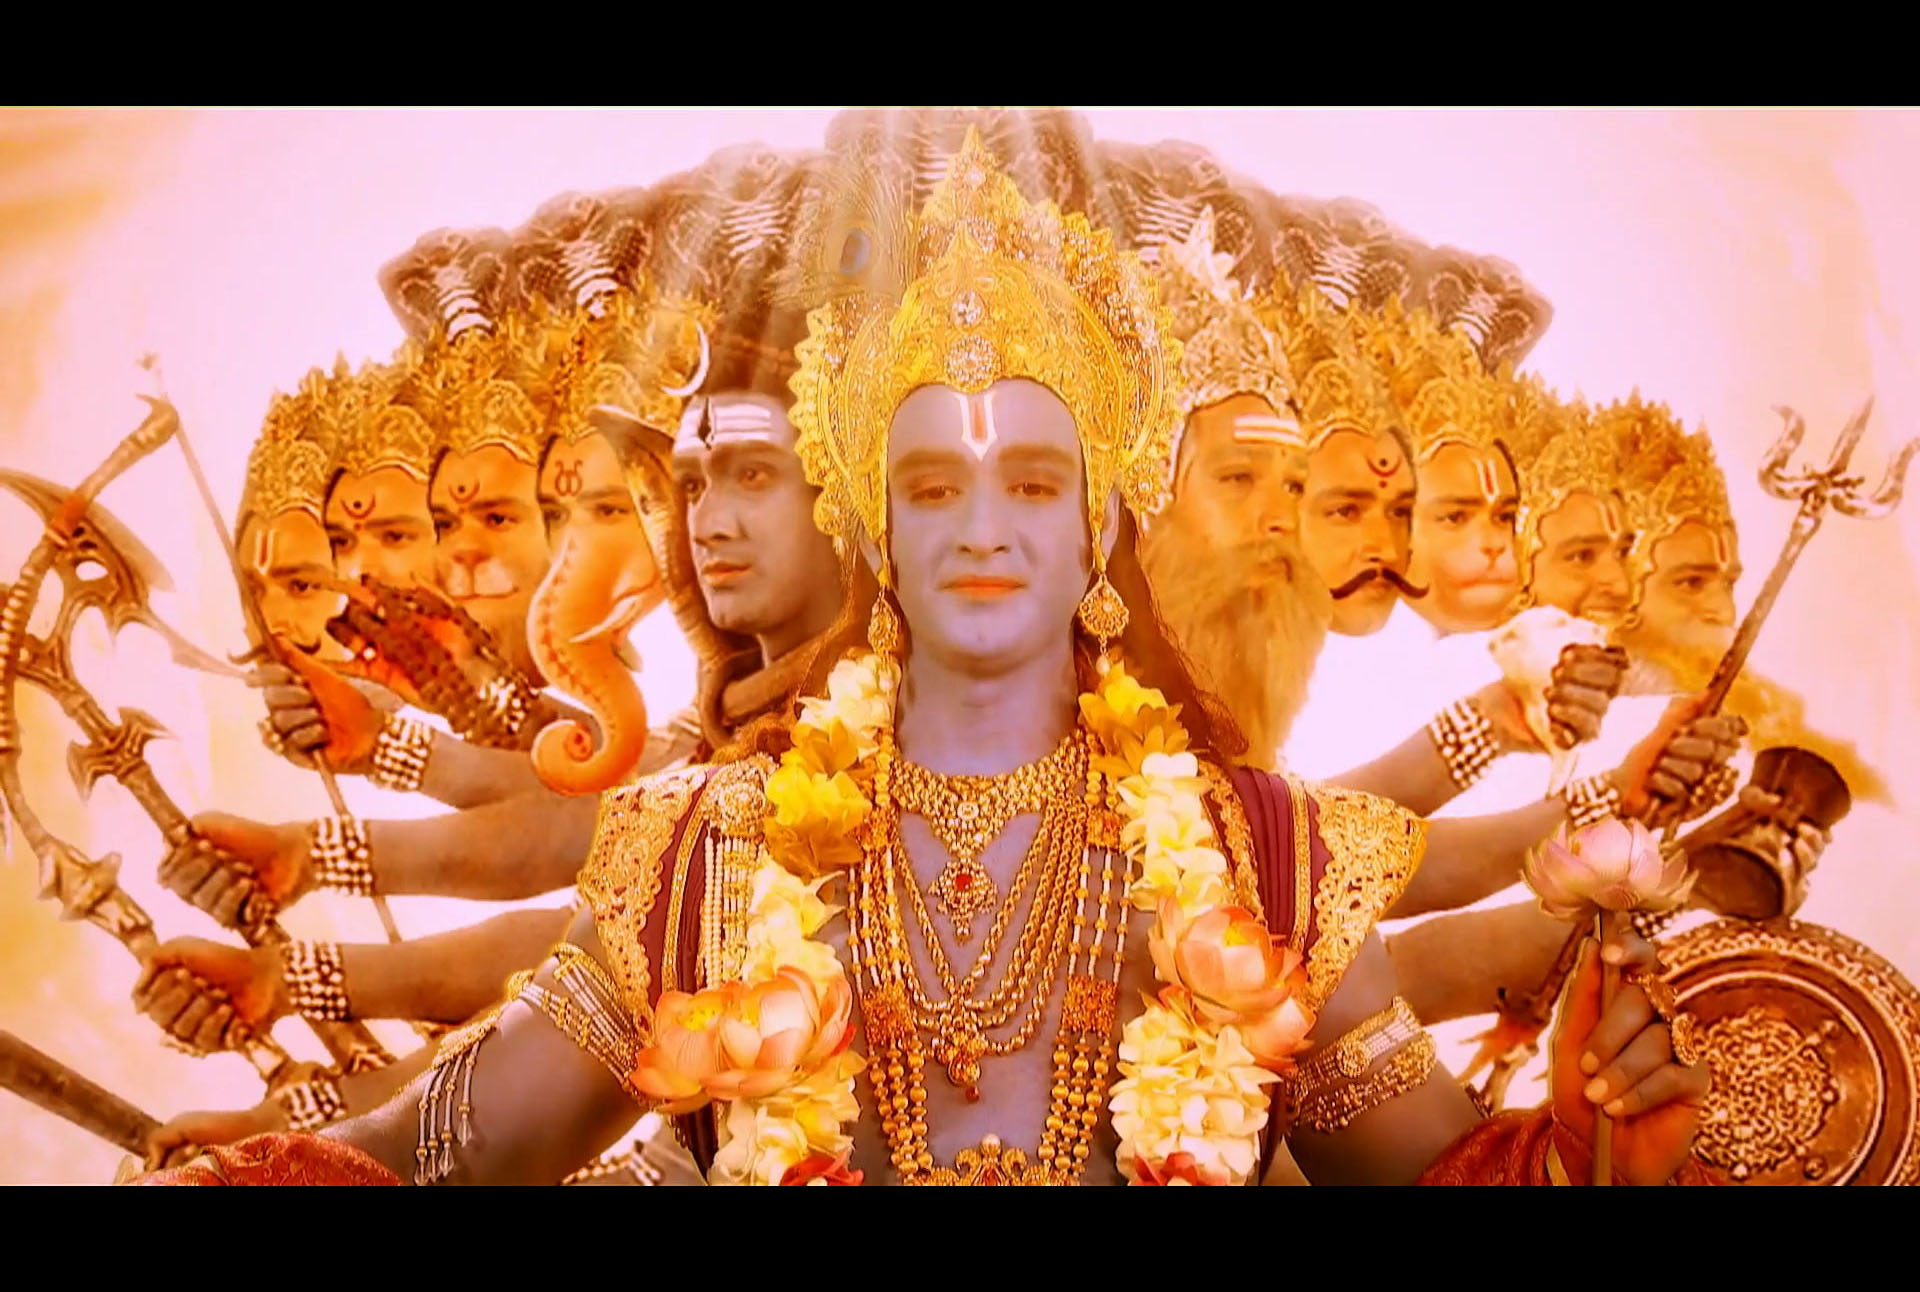 Sourabh Raaj Jain plays Shri Krishna in the Vishwaroop scene of the Bhagavad Gita in Star Plus Mahabharat (2014), in which he reveals to the warrior prince Arjun the knowledge of his universal form. Krishna is seen as the supreme form of the Hindu god Vishnu, decked in fine, gold-embellished garments, gold jewellery and an elaborate gold mukut (tall crown), draped in a garland of flowers and bathed in golden light. The faces and arms of his many avatars extend either side of him, weapons in hand, and the many-headed snake demigod Shesha is visible behind him. He looks down at Arjun with an expression of calm benevolence.